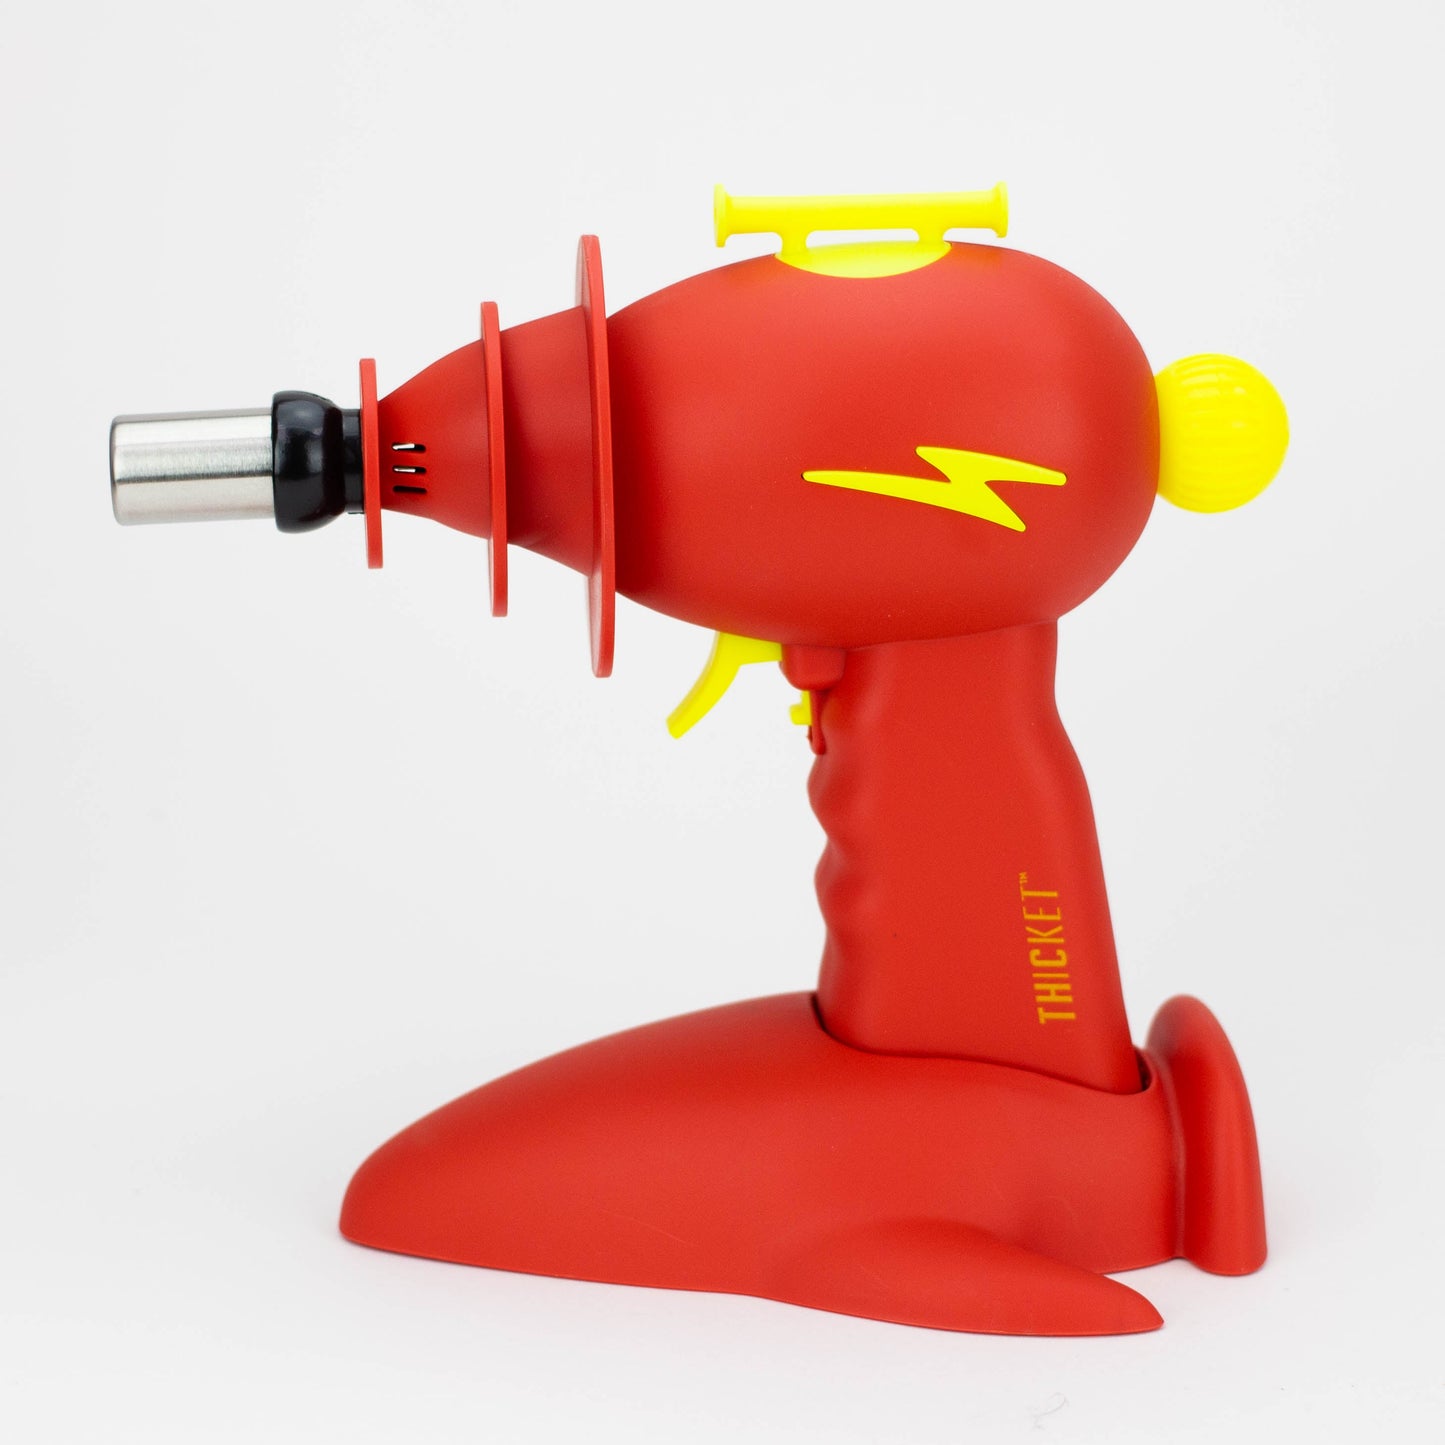 Thicket | Spaceout Lightyear ray gun Torch Lighter_11